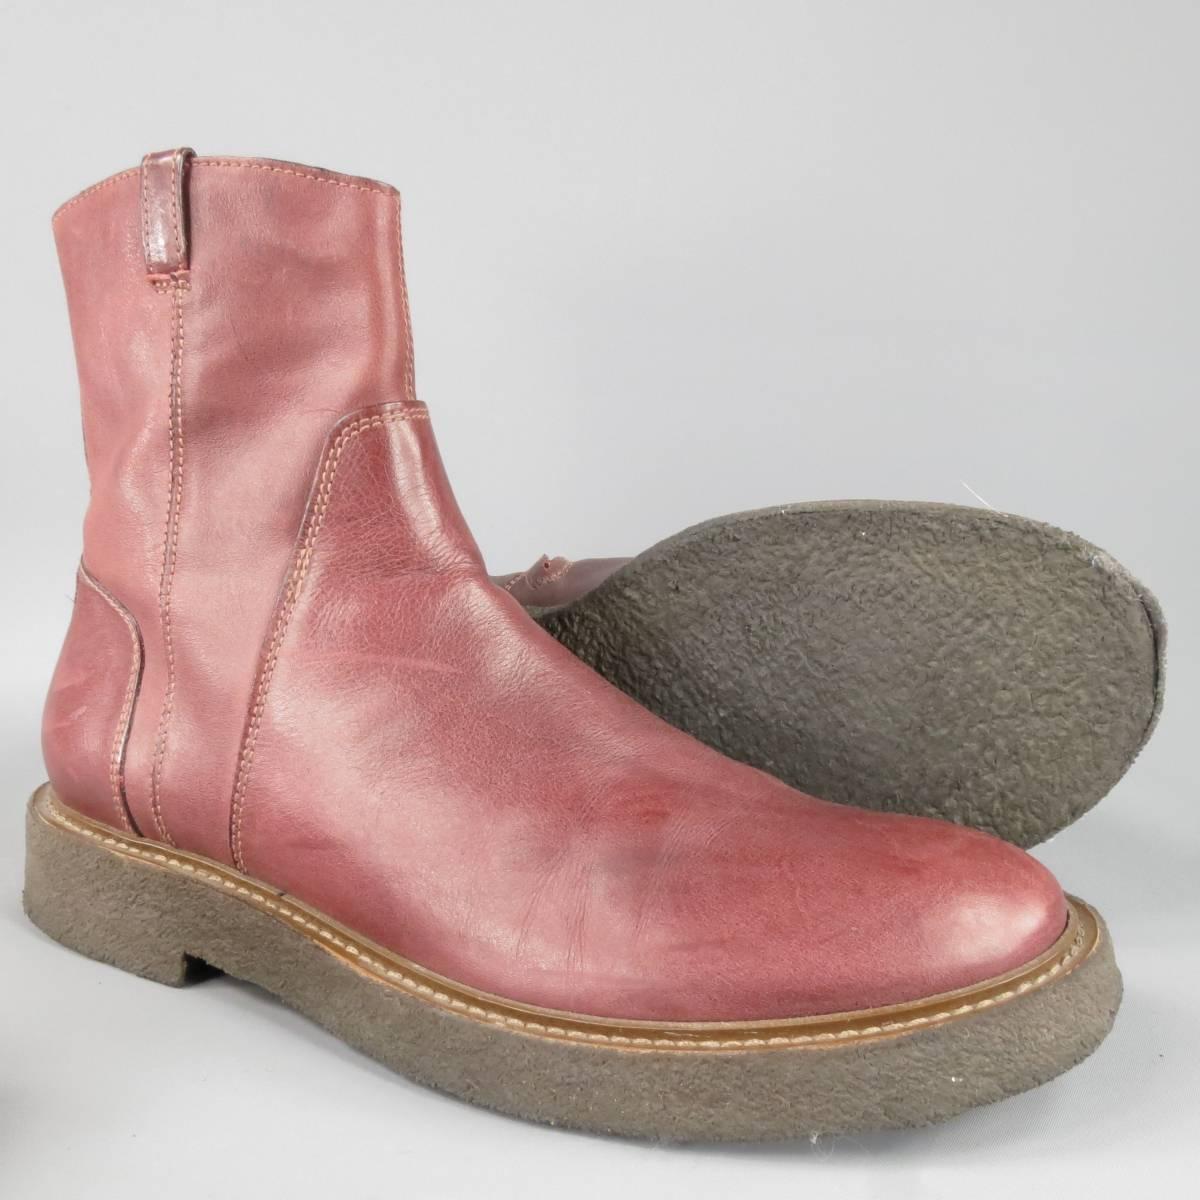 Maison Martin Margiela Boots consists of leather material in a burgundy color tone. Designed with a high collar, round toe front, side zipper opening, contrast stitching along vamp section and back of heel. Thick crepe rubber sole with heel. Made in